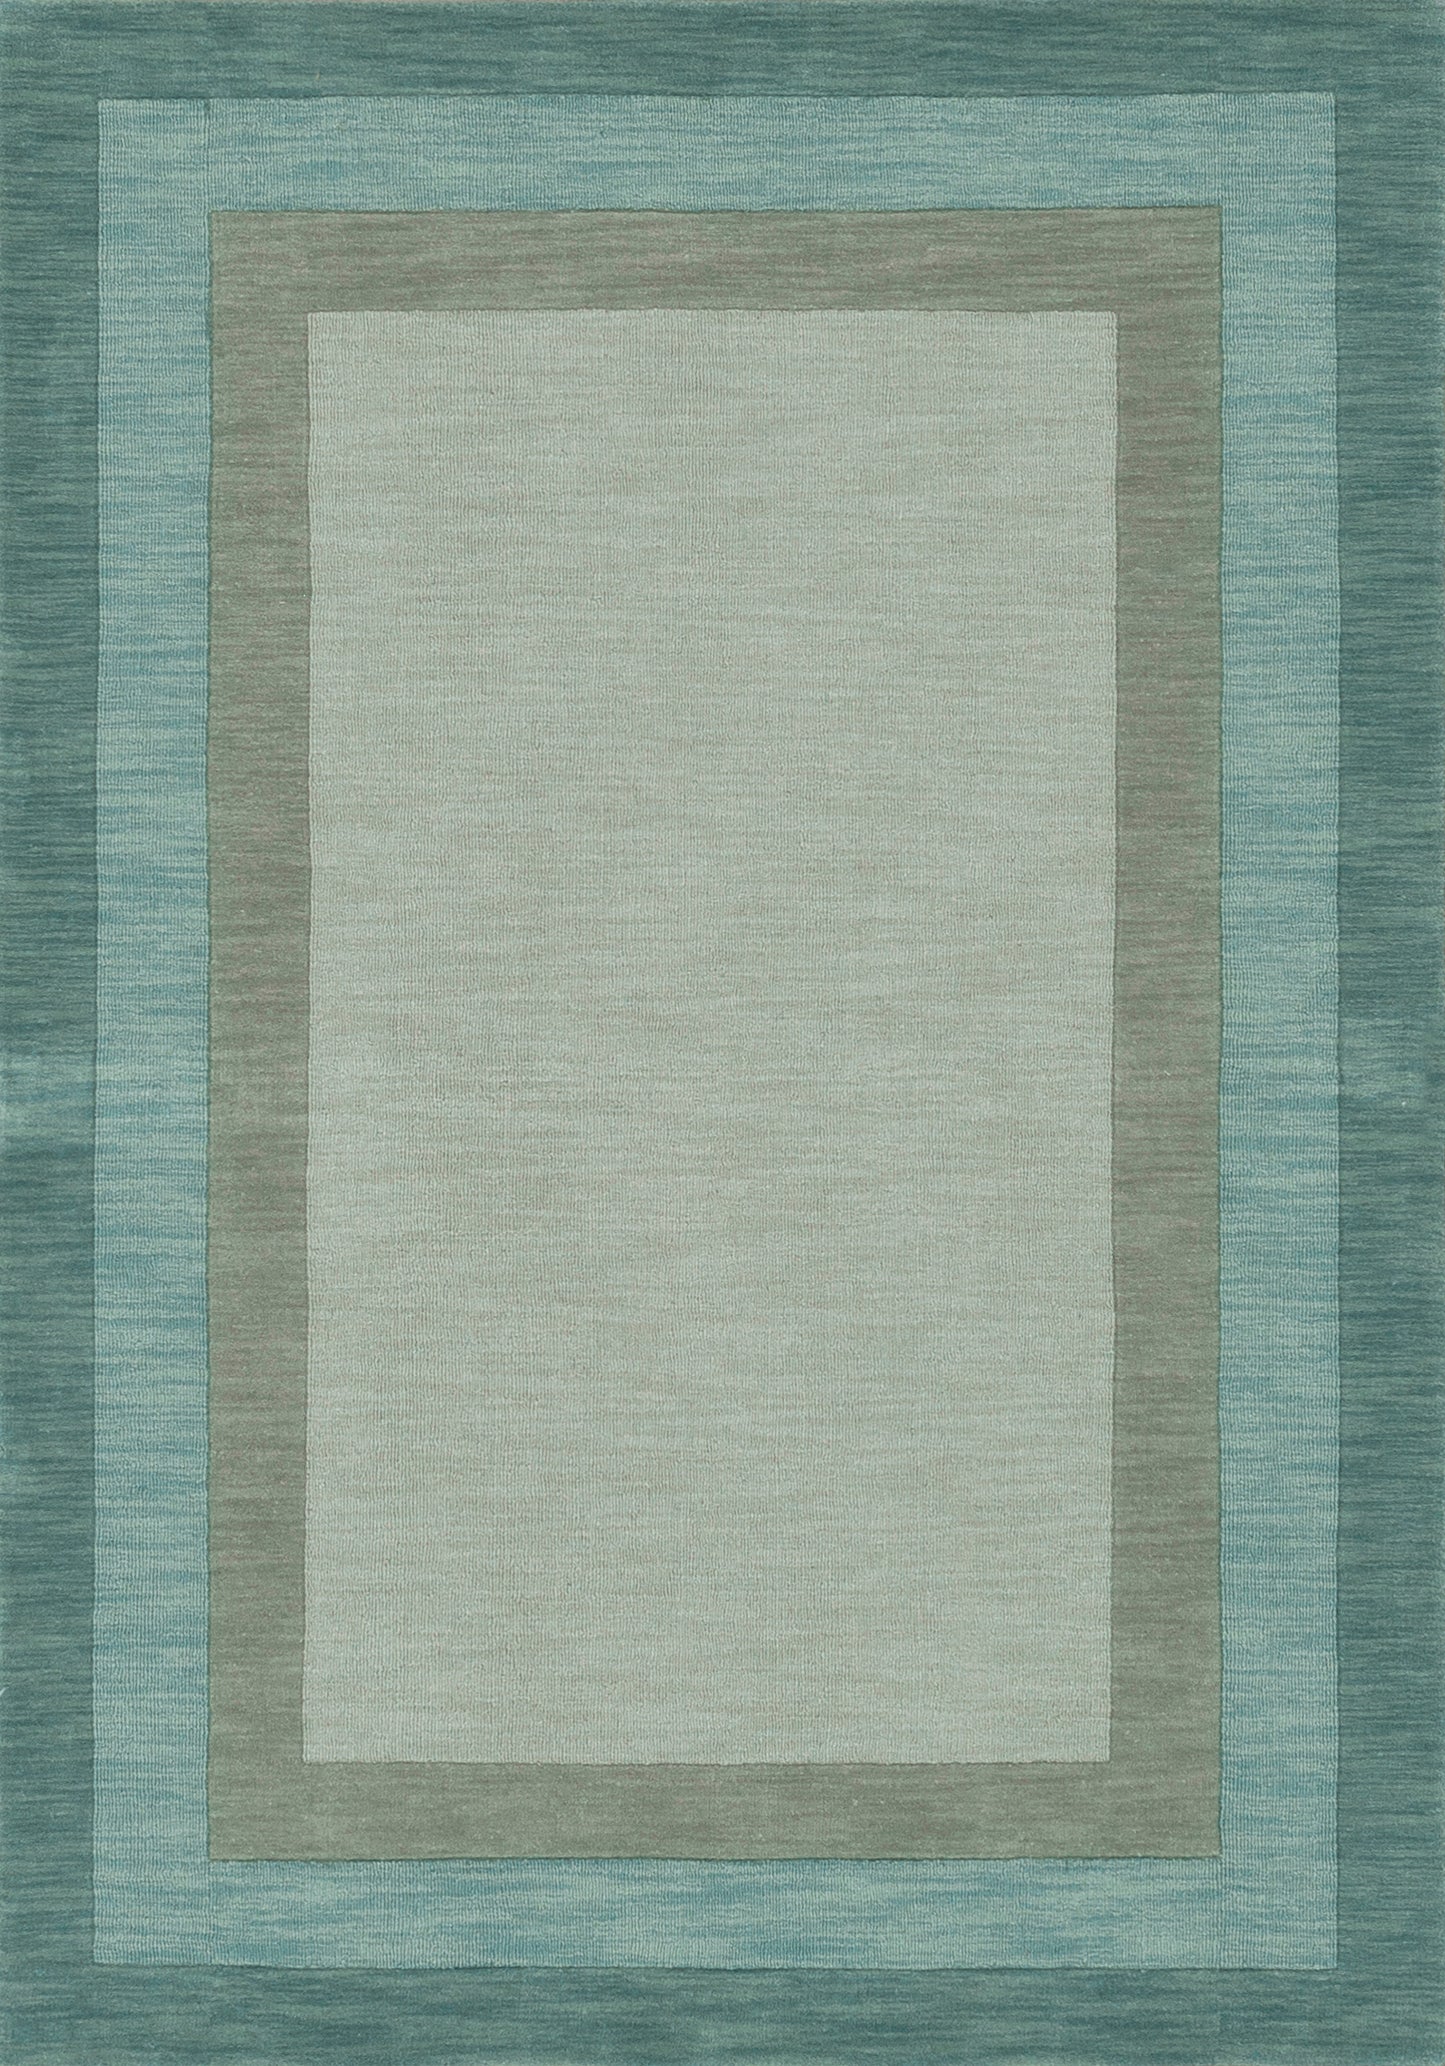 A picture of Loloi's Hamilton rug, in style HM-01, color Fern